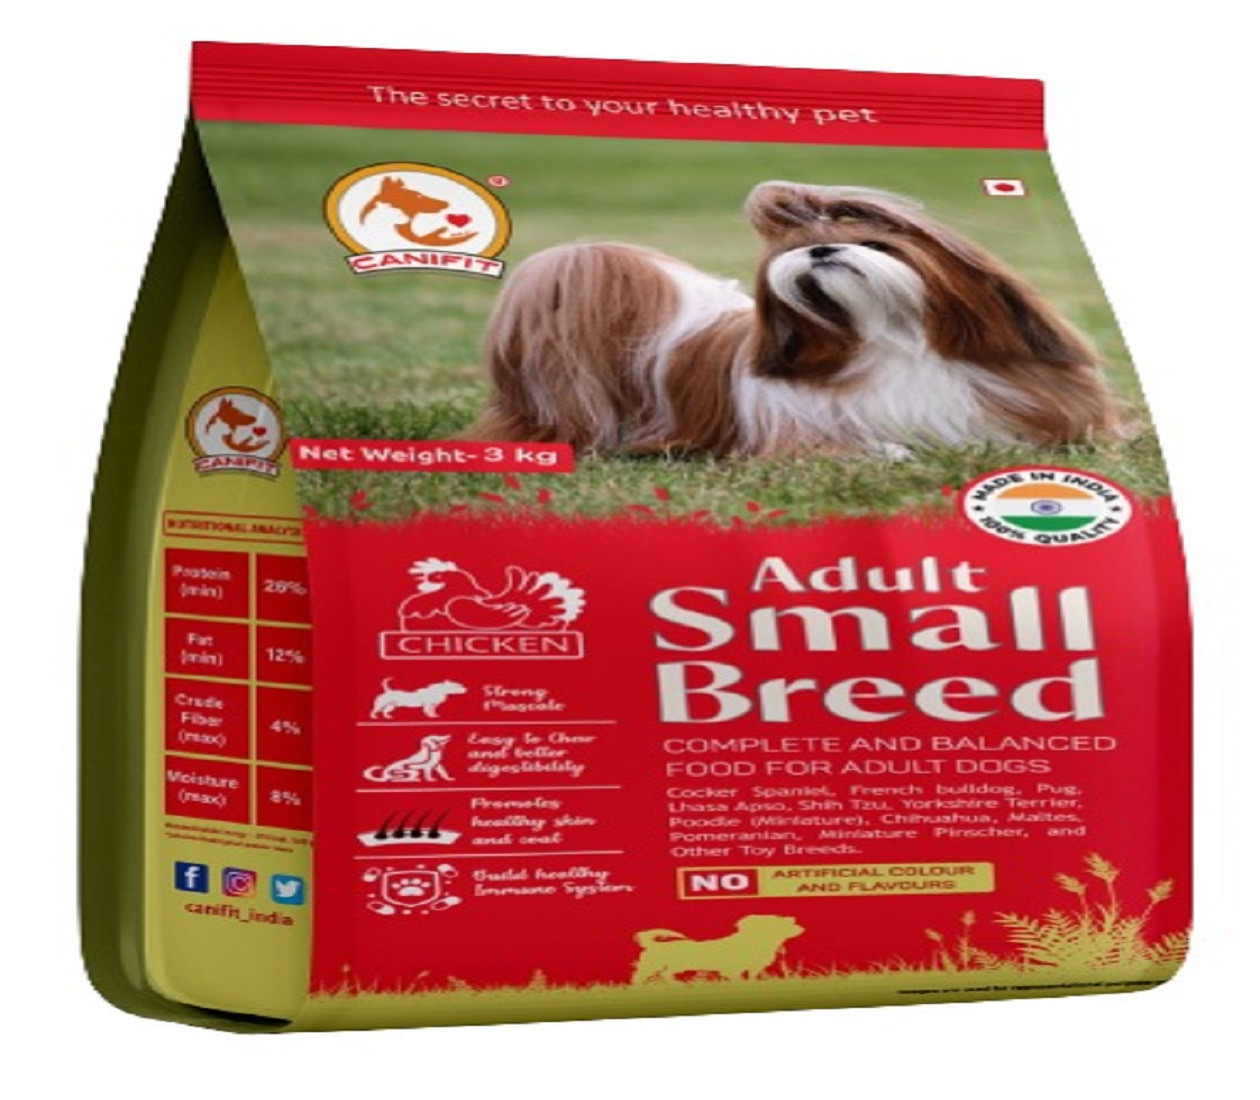 CANIFIT ADULT SMALL BREED FOOD (CHICKEN)